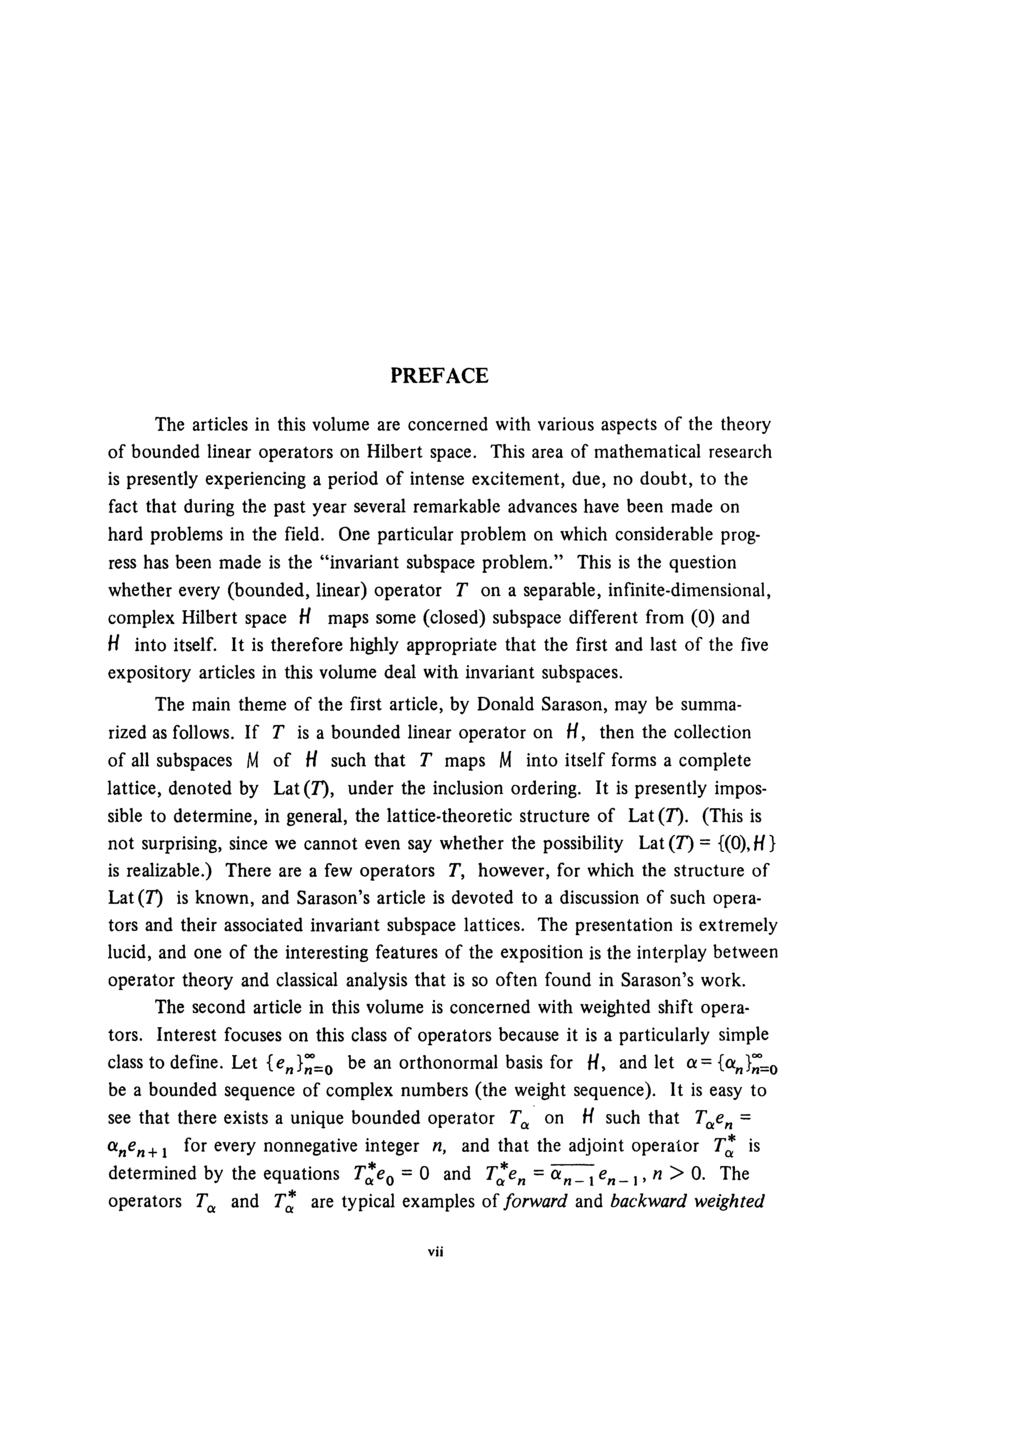 PREFACE The articles in this volume are concerned with various aspects of the theory of bounded linear operators on Hilbert space.